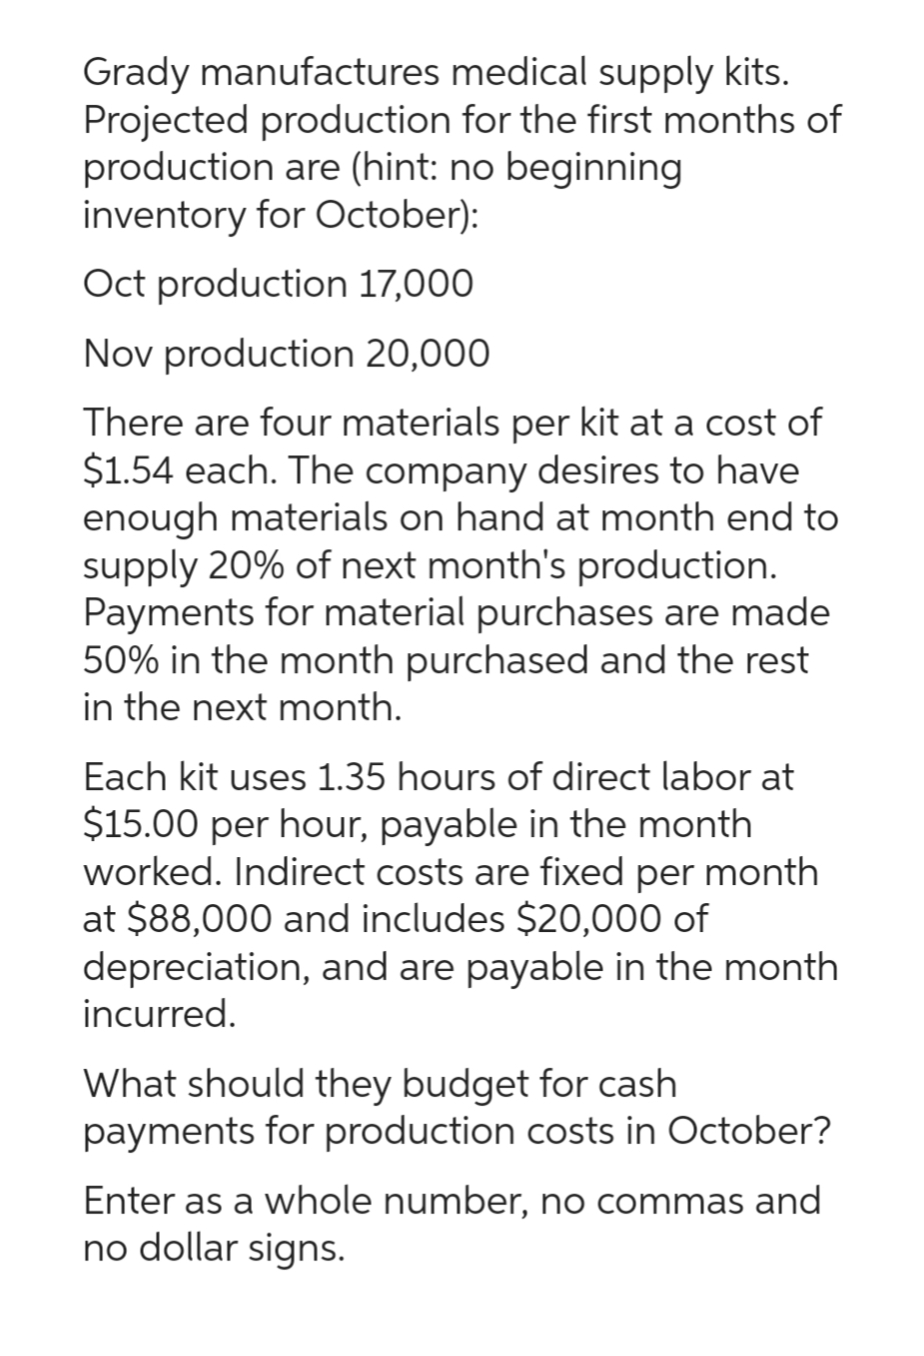 Grady manufactures medical supply kits.
Projected production for the first months of
production are (hint: no beginning
inventory for October):
Oct production 17,000
Nov production 20,000
There are four materials per kit at a cost of
$1.54 each. The company desires to have
enough materials on hand at month end to
supply 20% of next month's production.
Payments for material purchases are made
50% in the month purchased and the rest
in the next month.
Each kit uses 1.35 hours of direct labor at
$15.00 per hour, payable in the month
worked. Indirect costs are fixed per month
at $88,000 and includes $20,000 of
depreciation, and are payable in the month
incurred.
What should they budget for cash
payments for production costs in October?
Enter as a whole number, no commas and
no dollar signs.